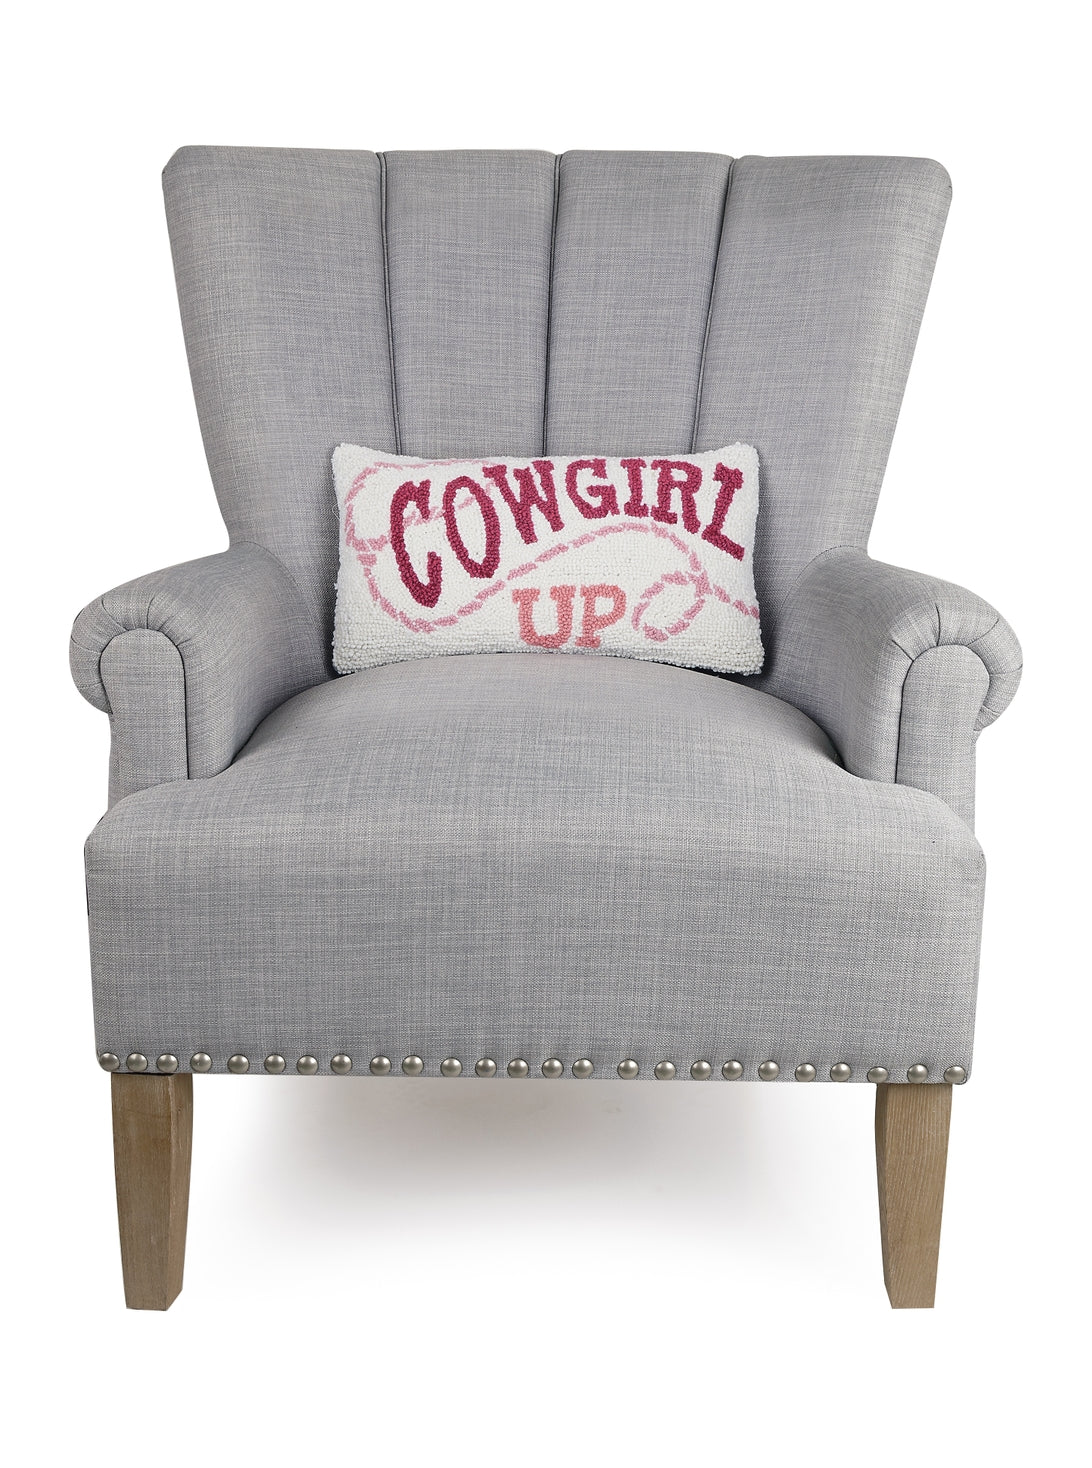 Cowgirl Up Wool Hook Pillow